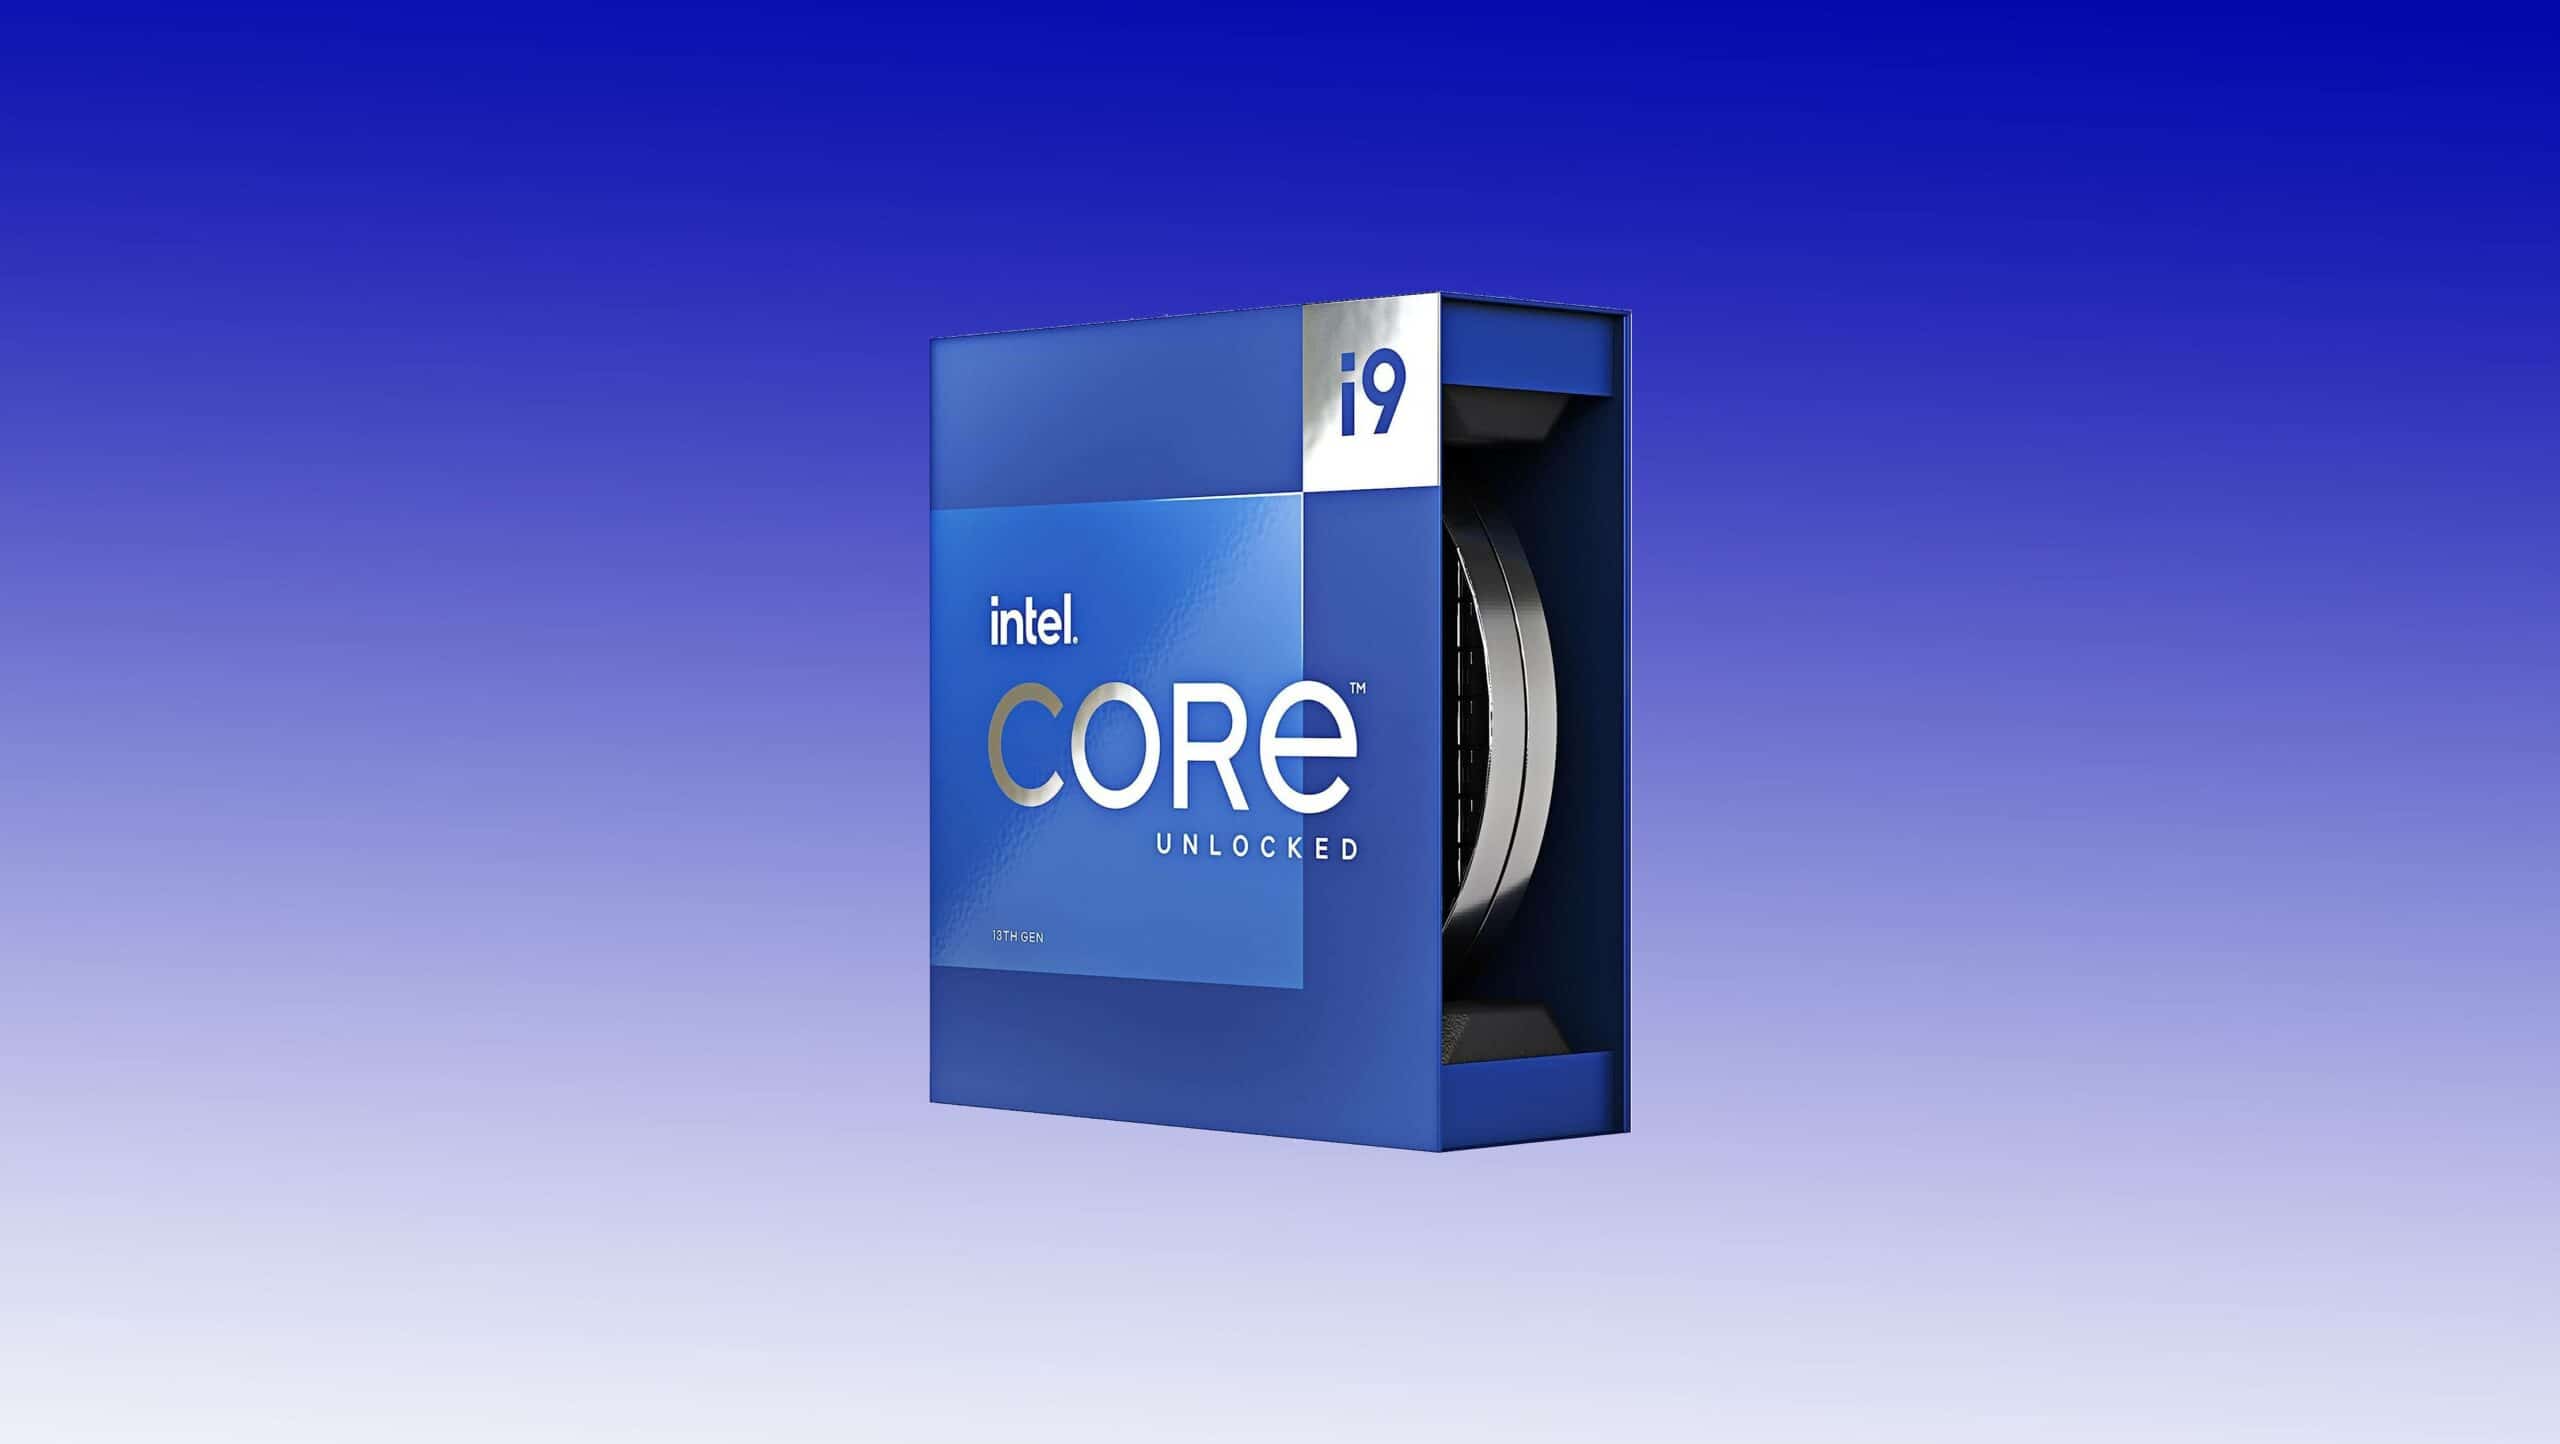 An Intel Core i9 13900K processor box with a visible CPU inside, against a gradient blue background.